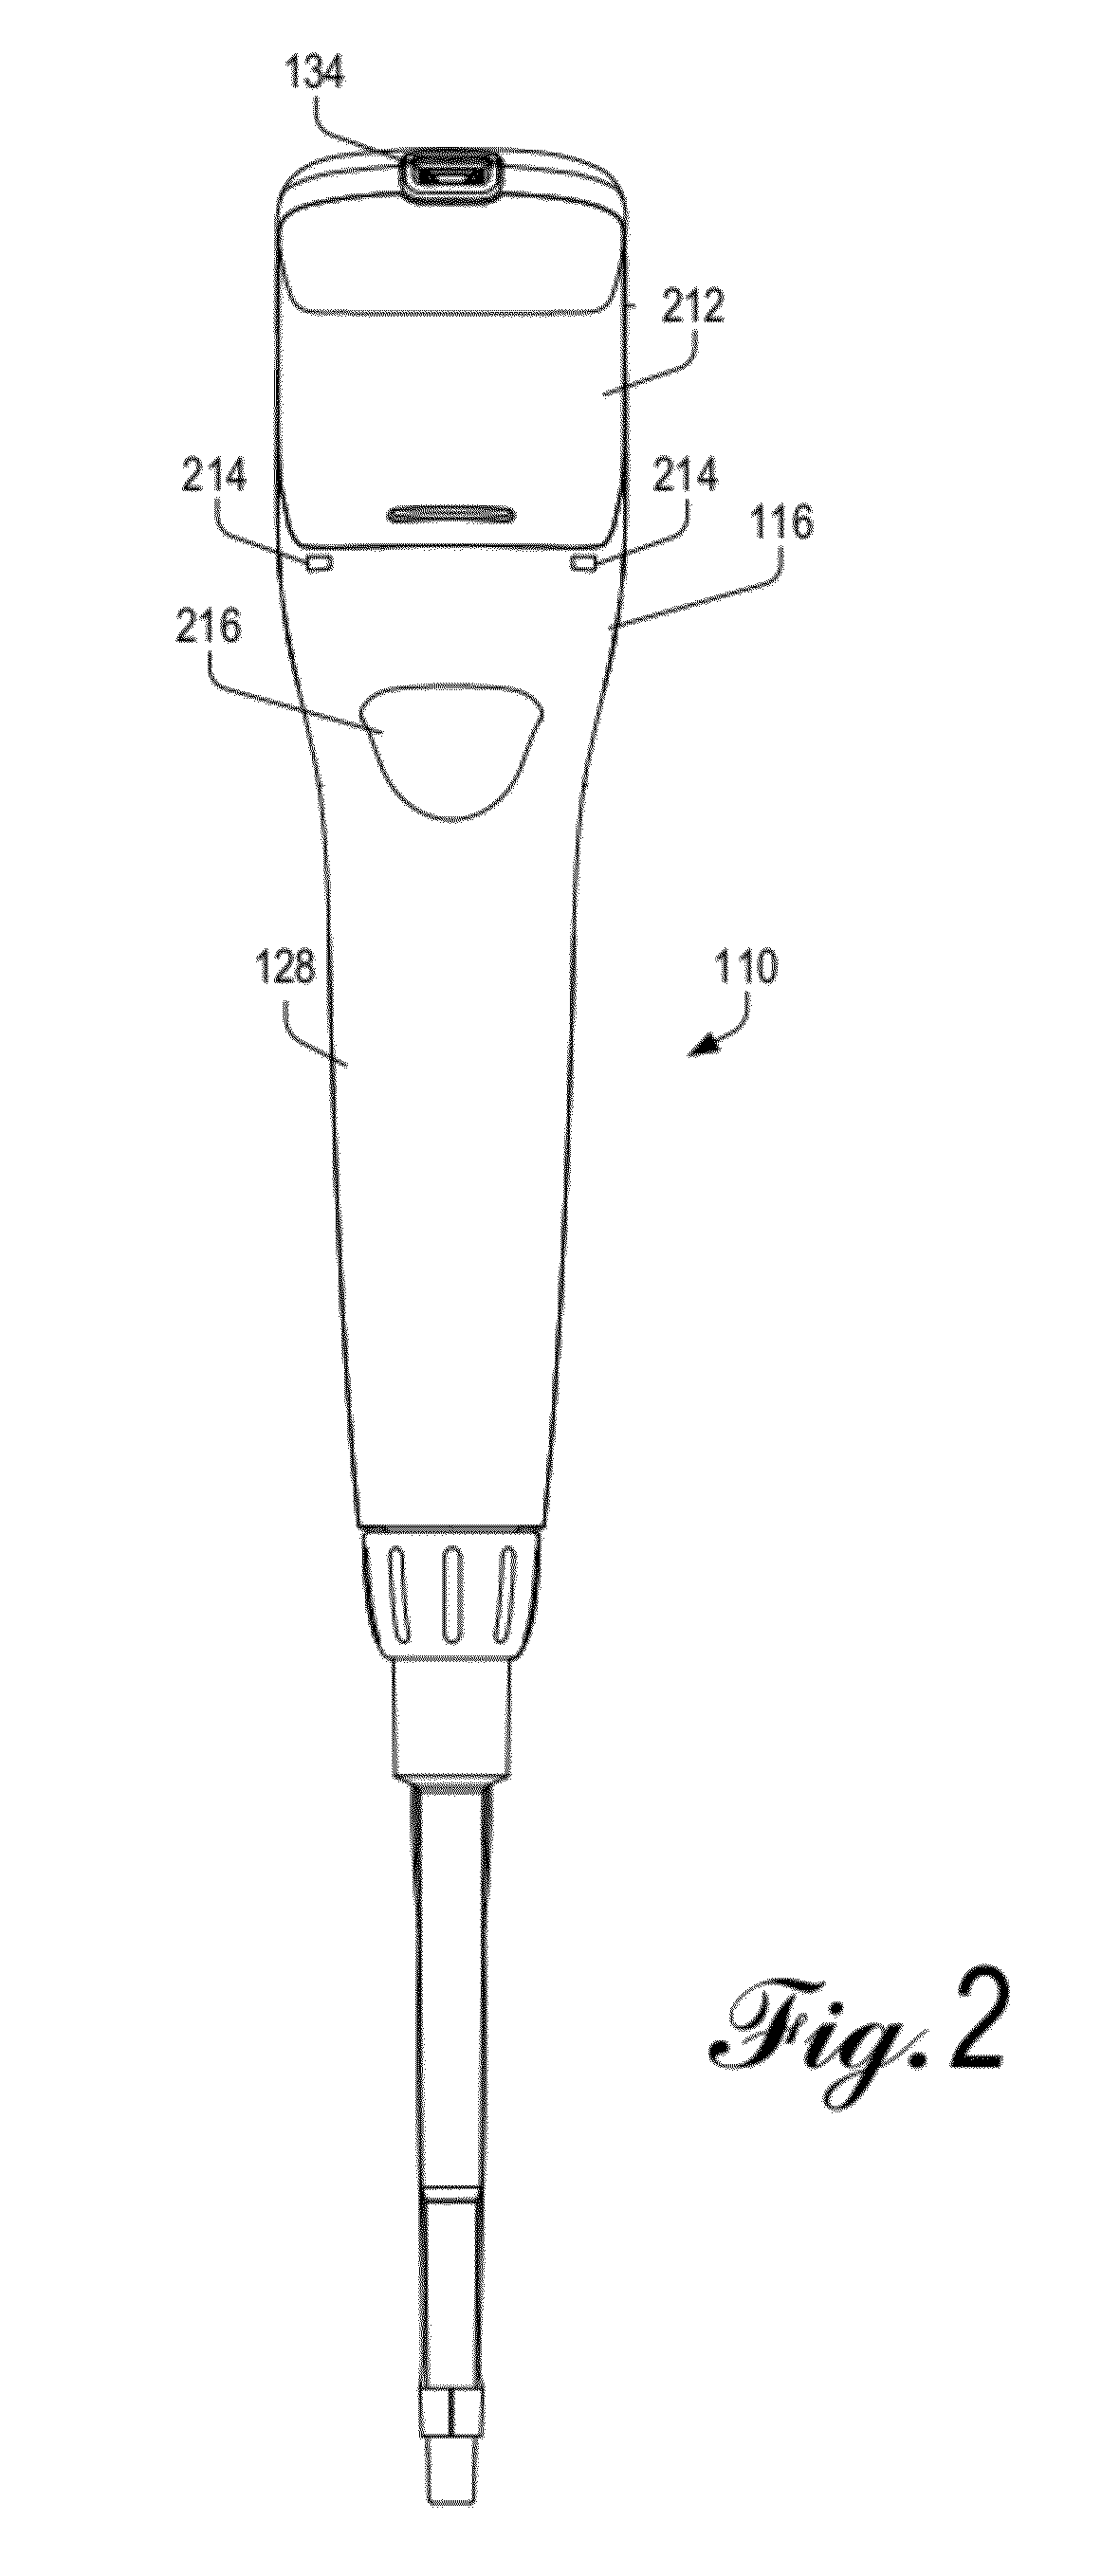 Electronic pipette with two-axis controller